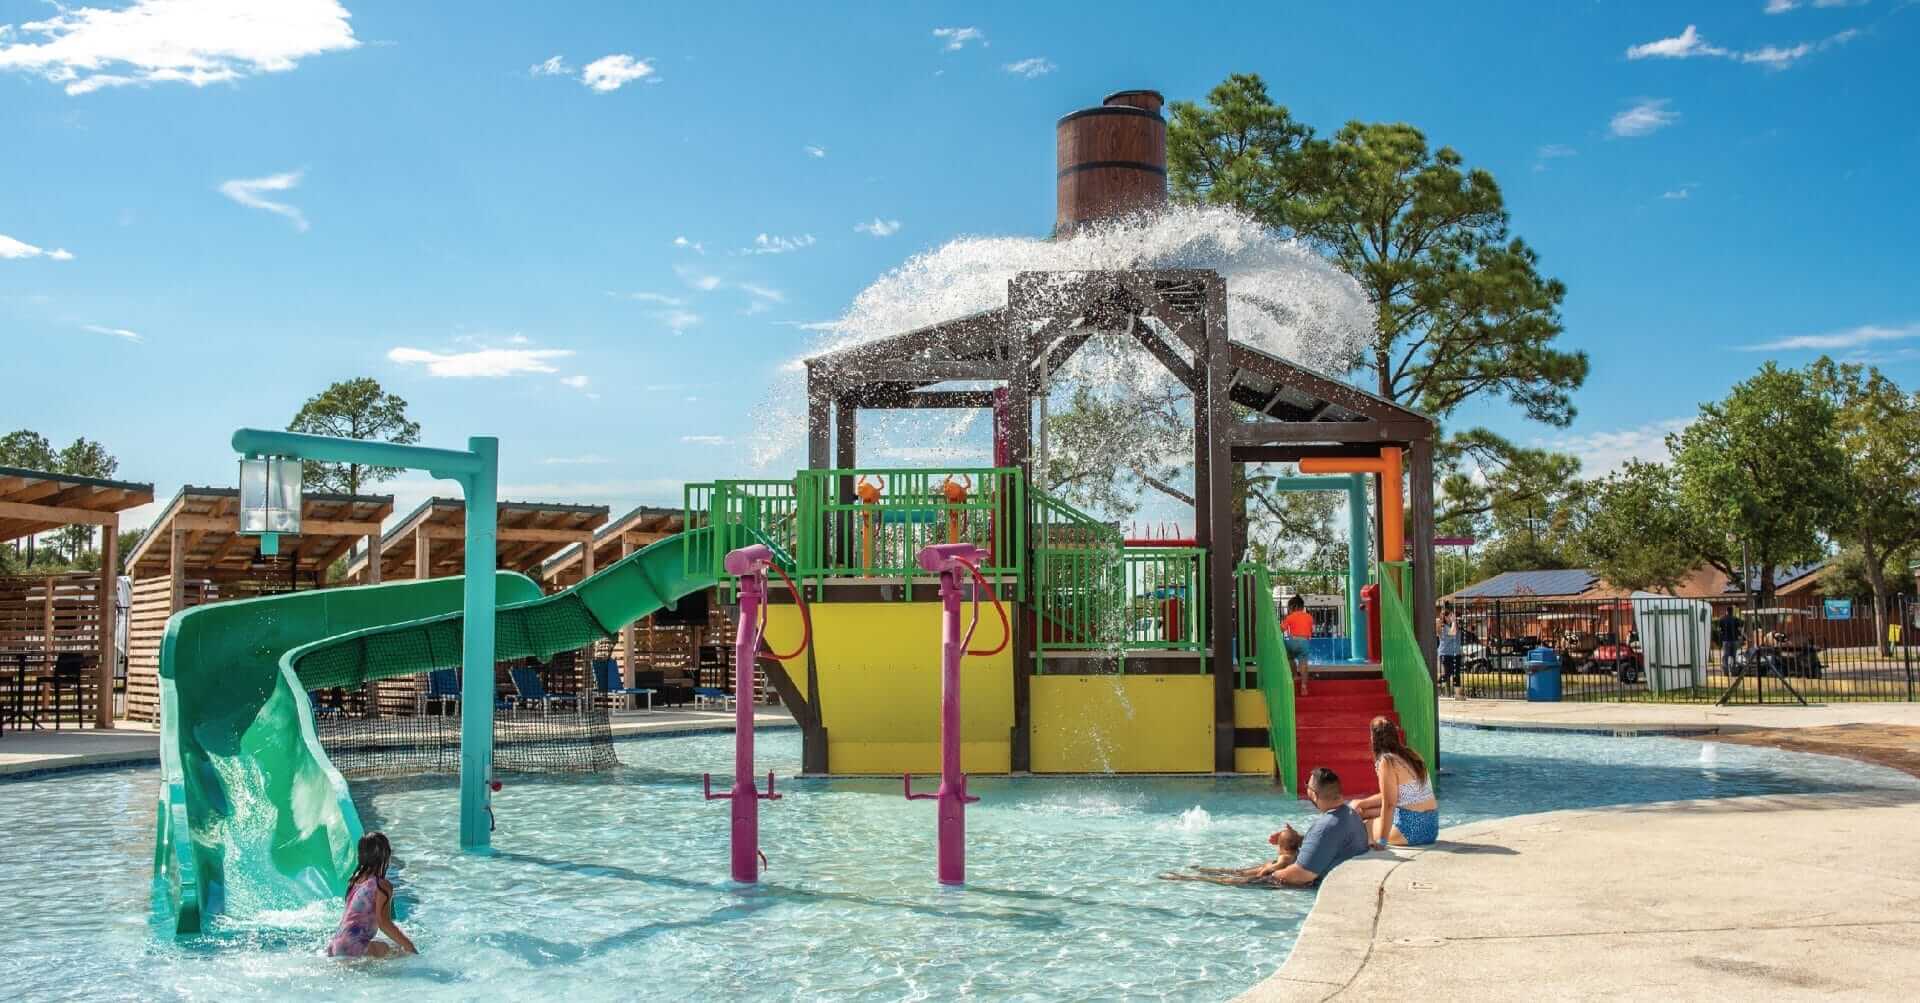 A photo of the aquatic play structure by Interactive play with the power plunge feature releasing a large volume of water at the RV resort in Waller, Texas.